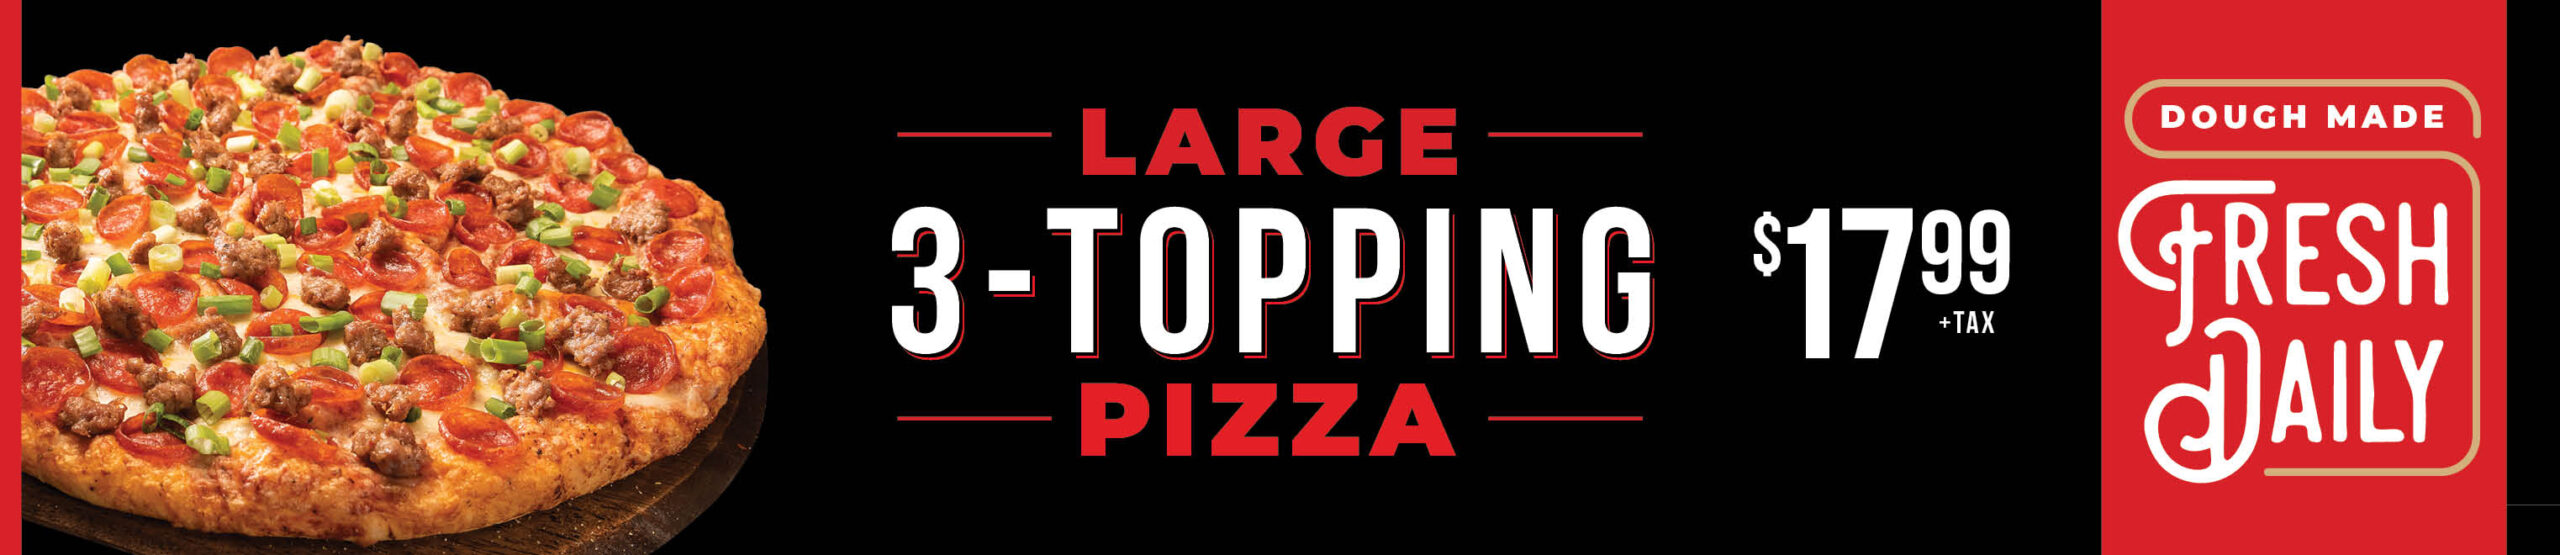 Large 3-Topping Pizza $17.99 plus tax - Dough Made Fresh Daily